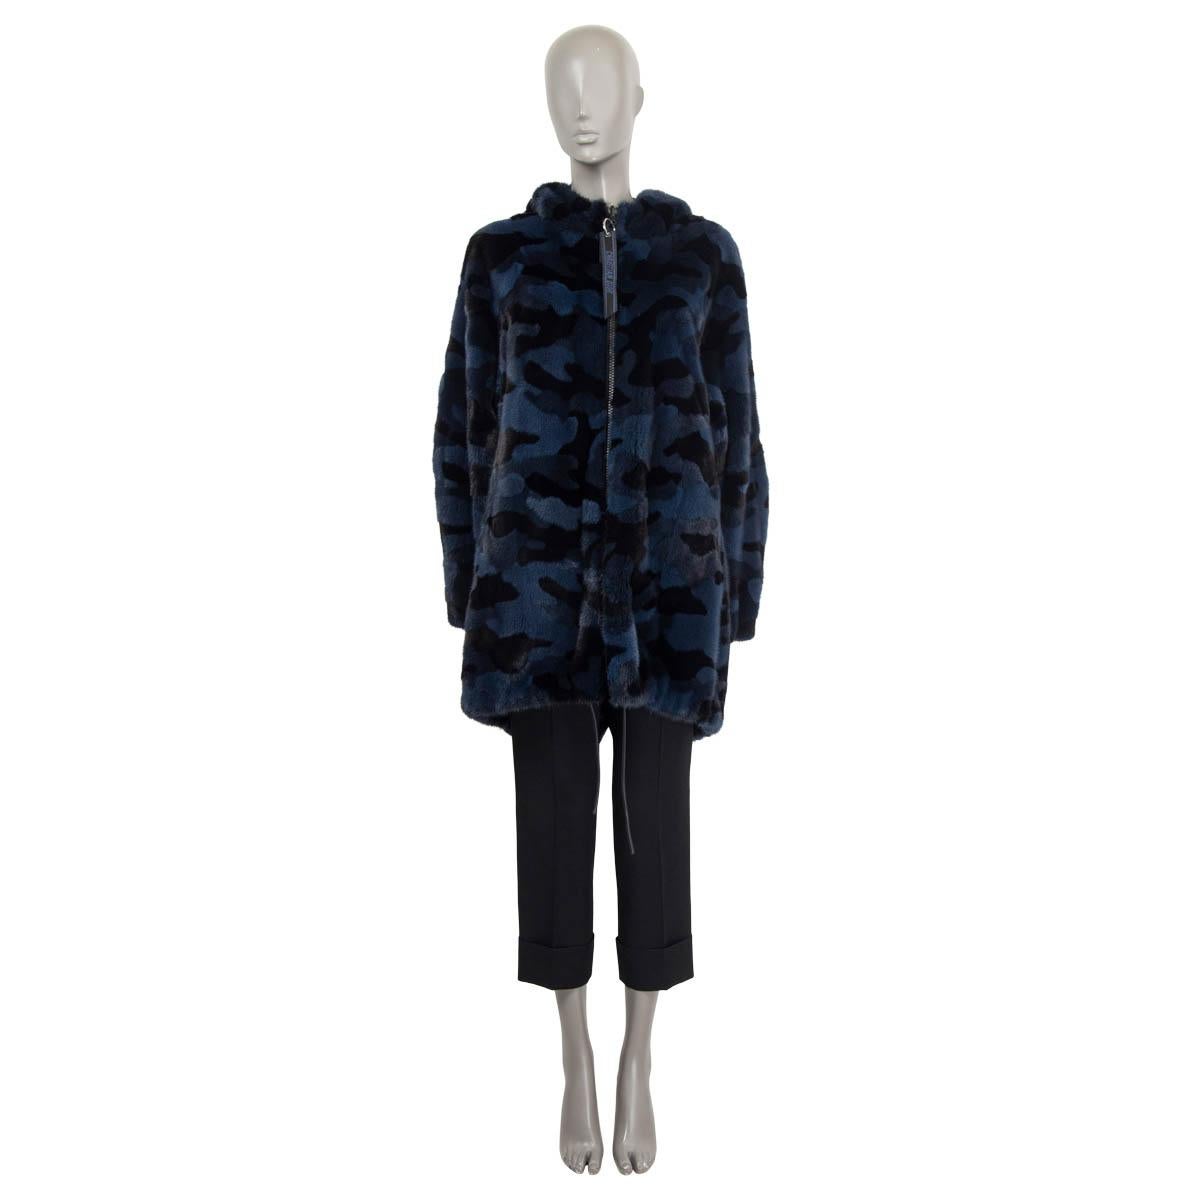 100% authentic Christian Dior hooded zip coat in navy and black camouflage mink fur (100%). Features long sleeves, a slit on the back and two side slit pockets. Opens with a 'Christian Dior' zipper on the front. Lined in black and navy goat leather